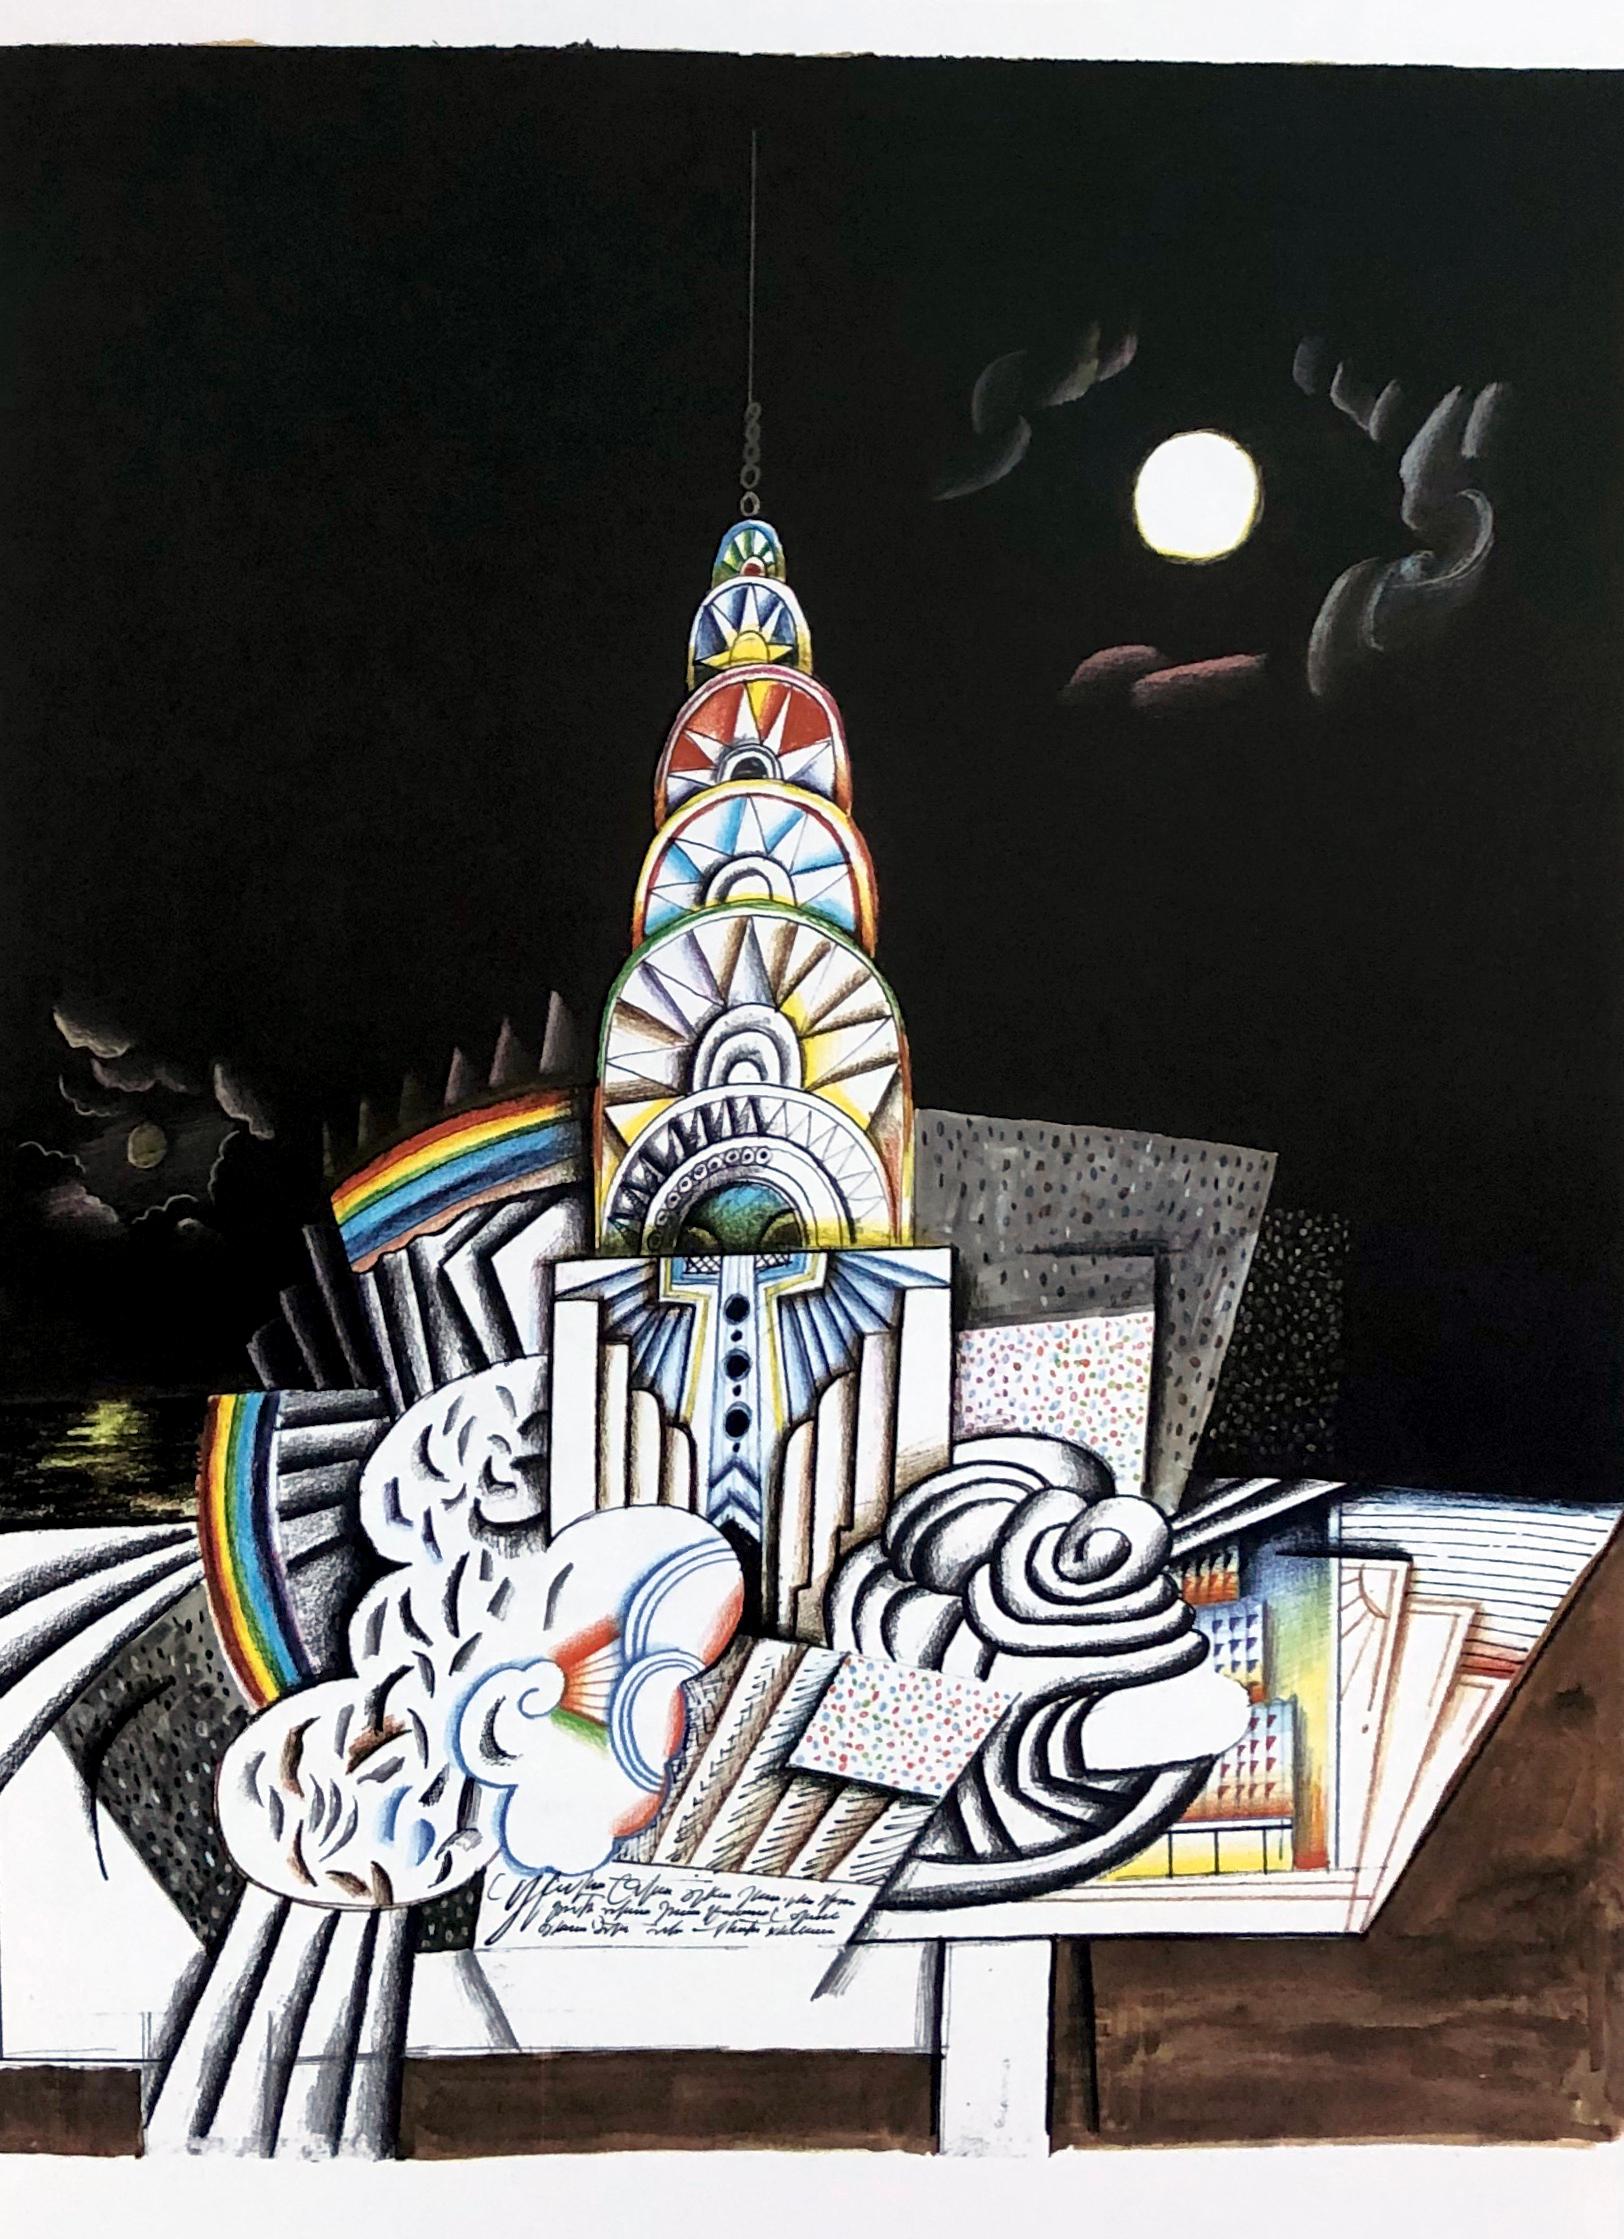 Saul Steinberg (untitled) Chrysler Building Lithograph from Derrière le miroir:

Lithograph in colors c.1970.
11 x 15 inches
Very good overall vintage condition. 
Unsigned from an edition of unknown.

Derrière le miroir:
In October 1945 the French